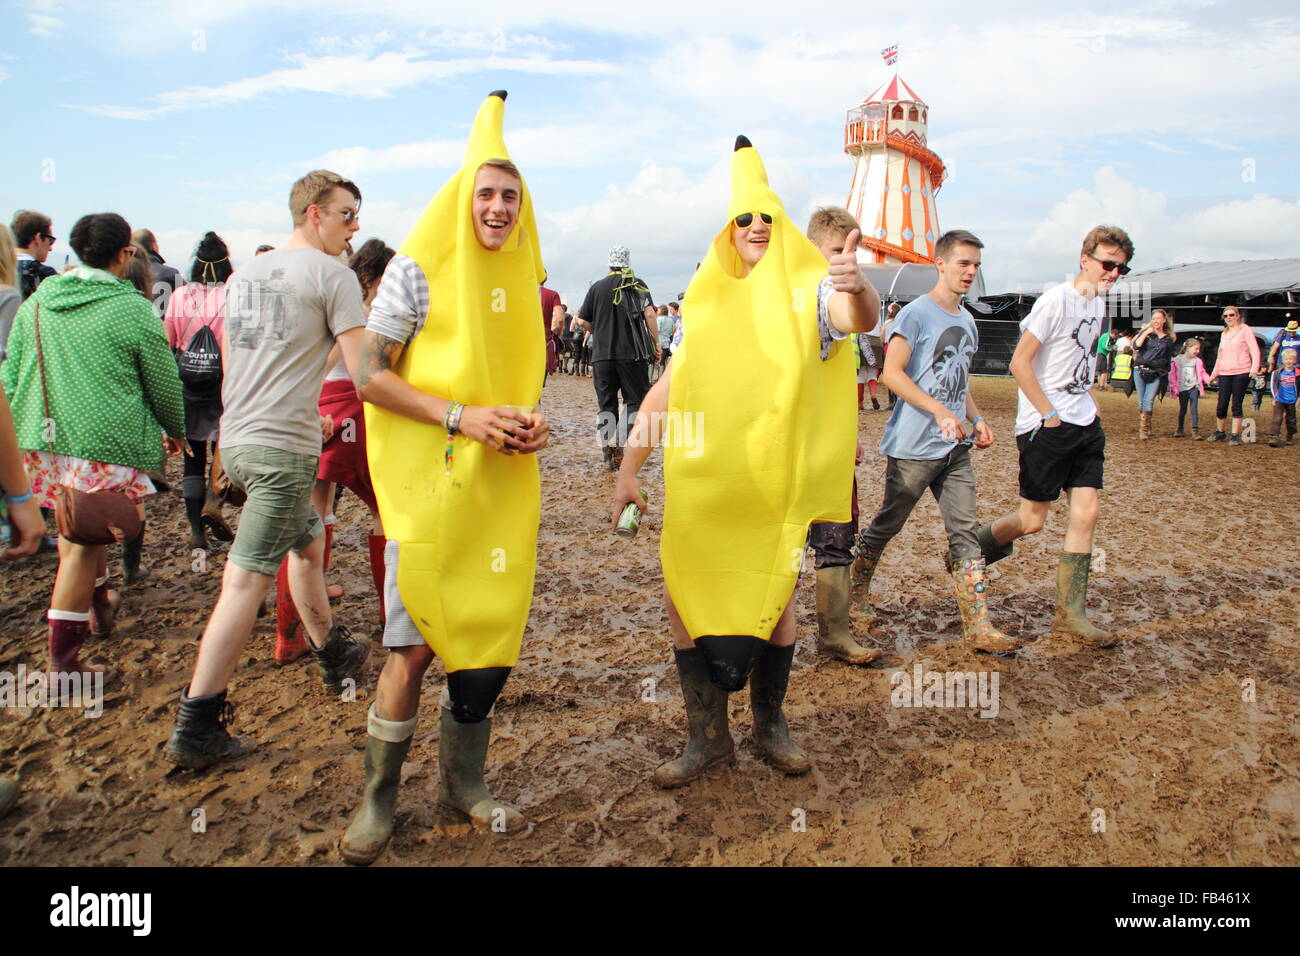 A pair of young men dress as bananas as part of the annual fancy dress event at the Y Not music festival, Derbyshire England UK Stock Photo